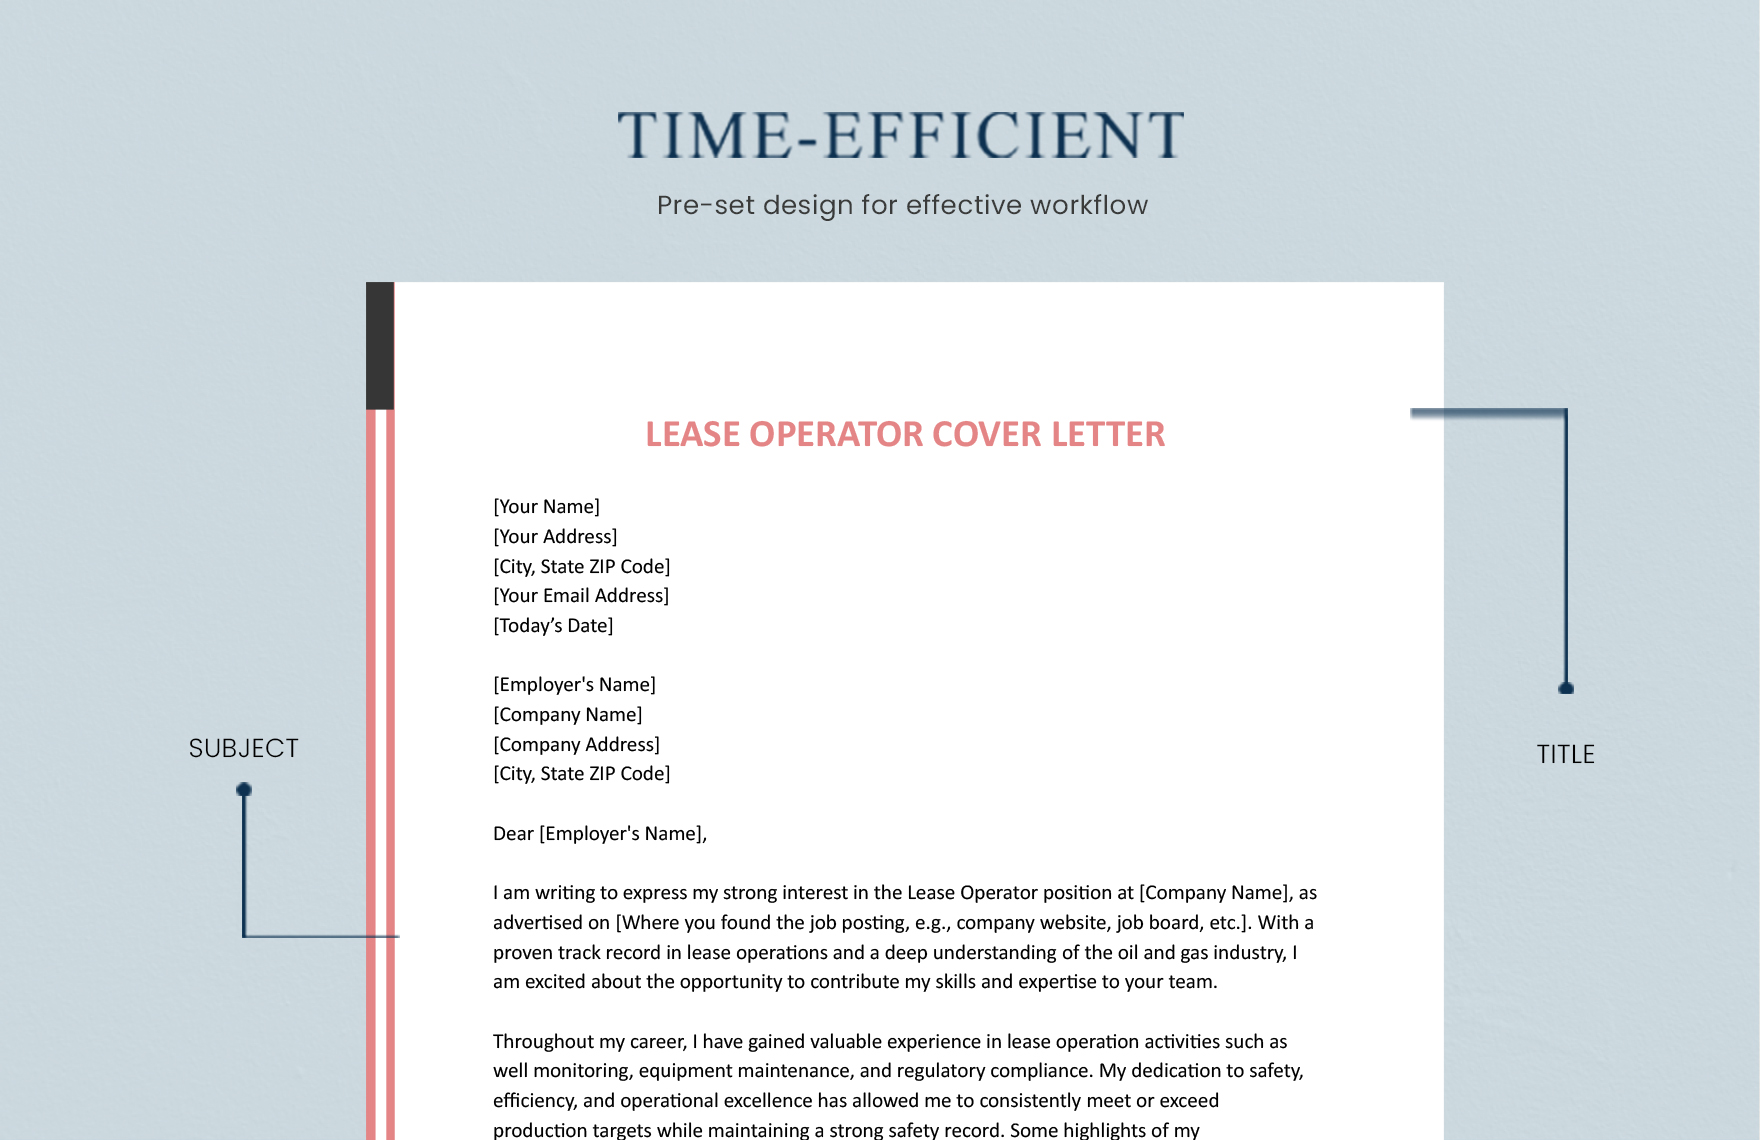 Lease Operator Cover Letter